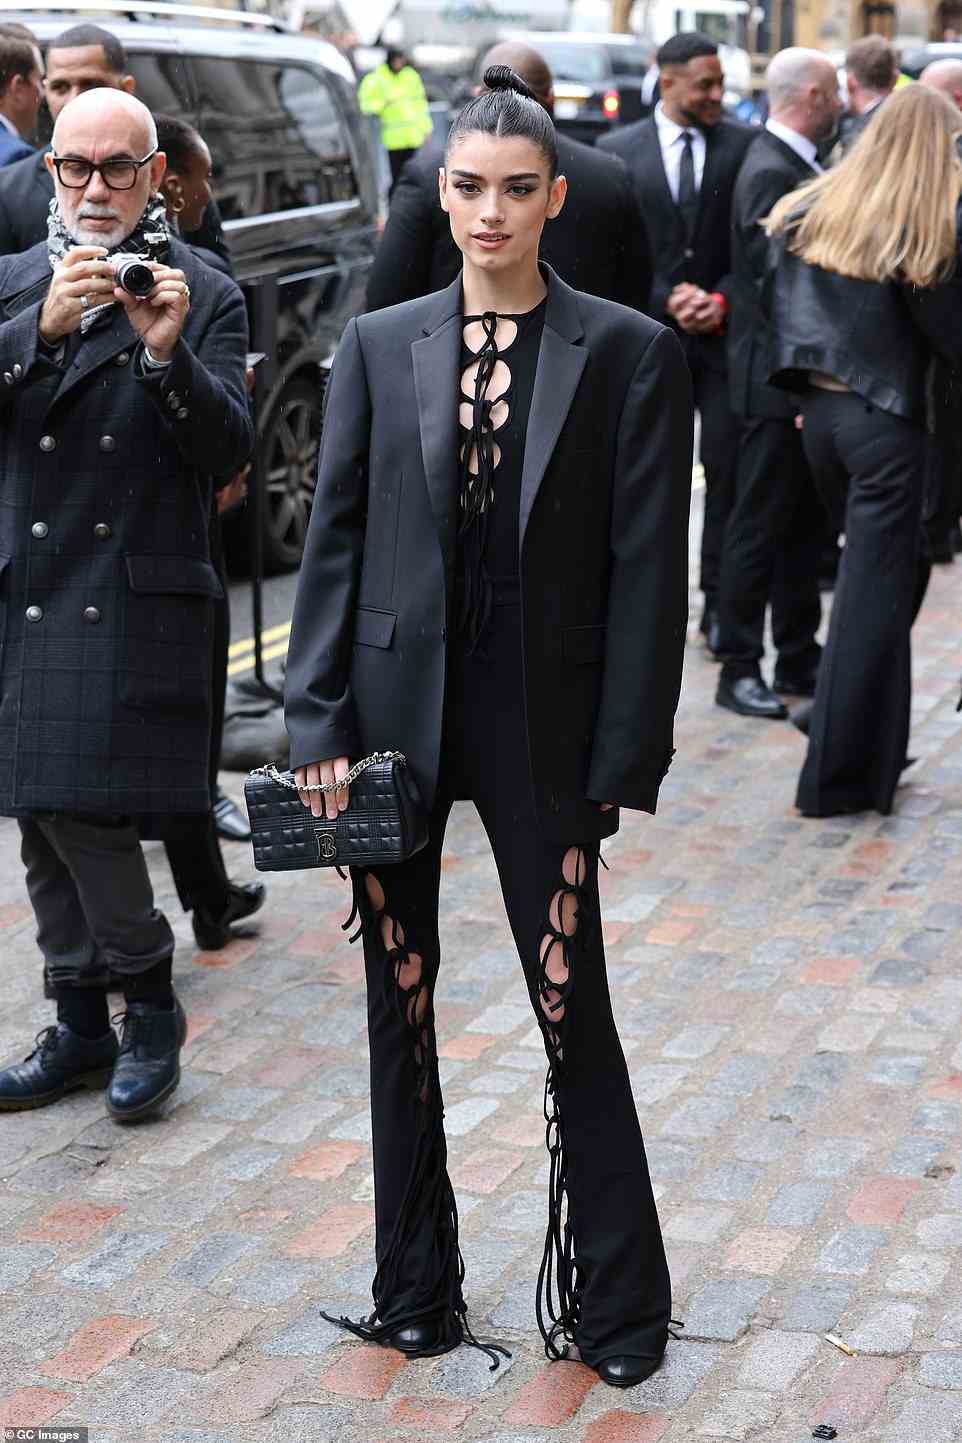 Skin: American singer Dixie D'Amelio, 20, flashed her flesh in a cut out jumpsuit which she paired with a tuxedo jacket and Burberry handbag